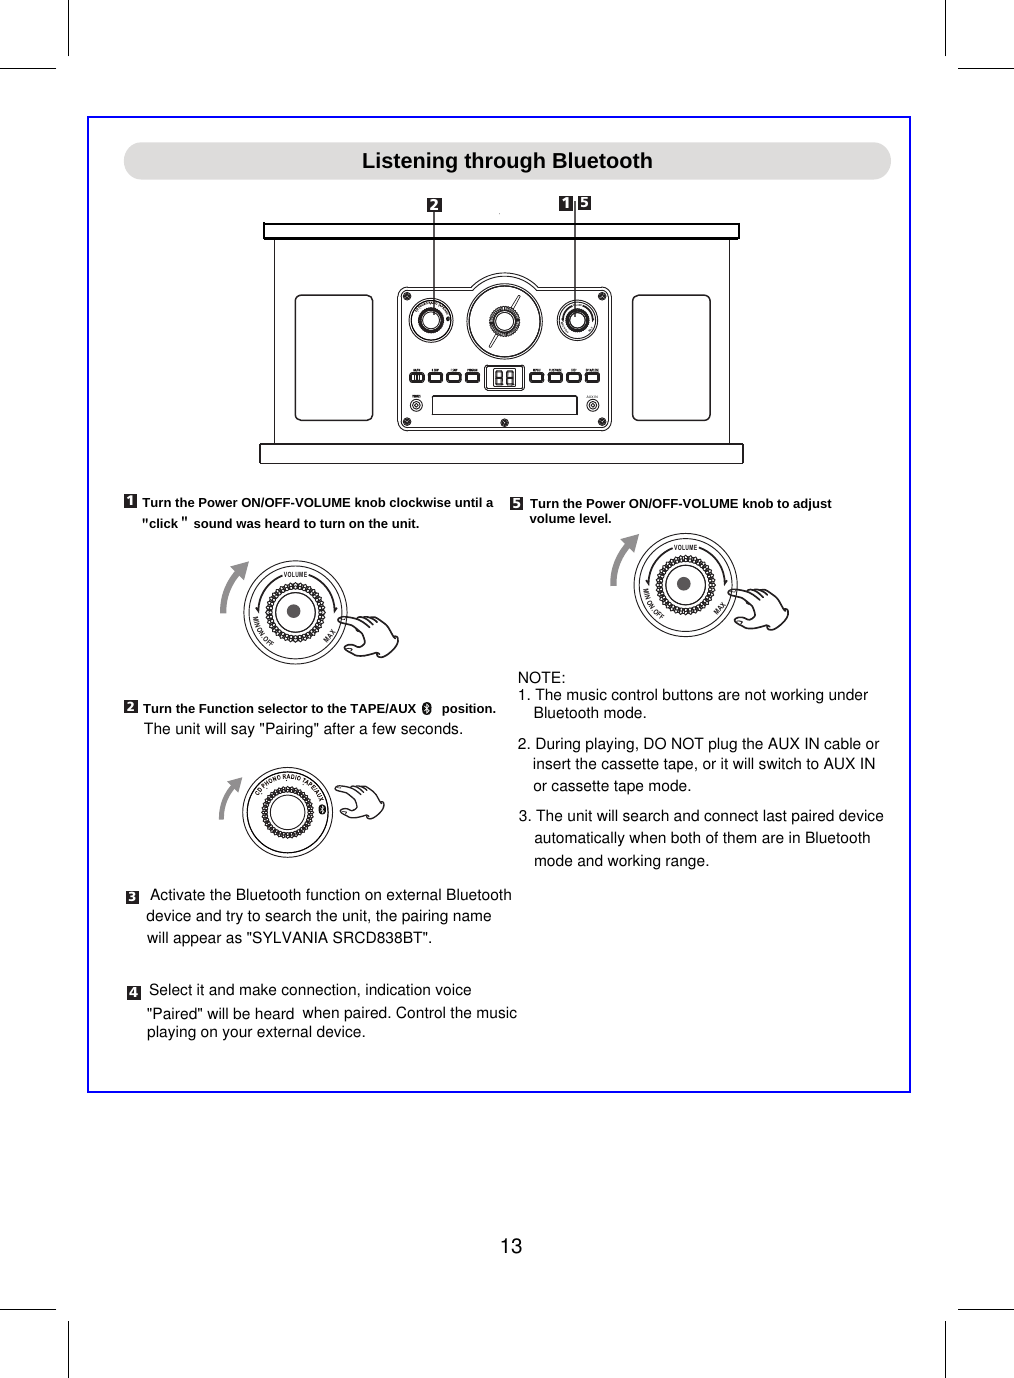 Page 14 of Junlan Electronic SRCD838BT Nostalgia 6 in 1 Turntable Radio User Manual                     1